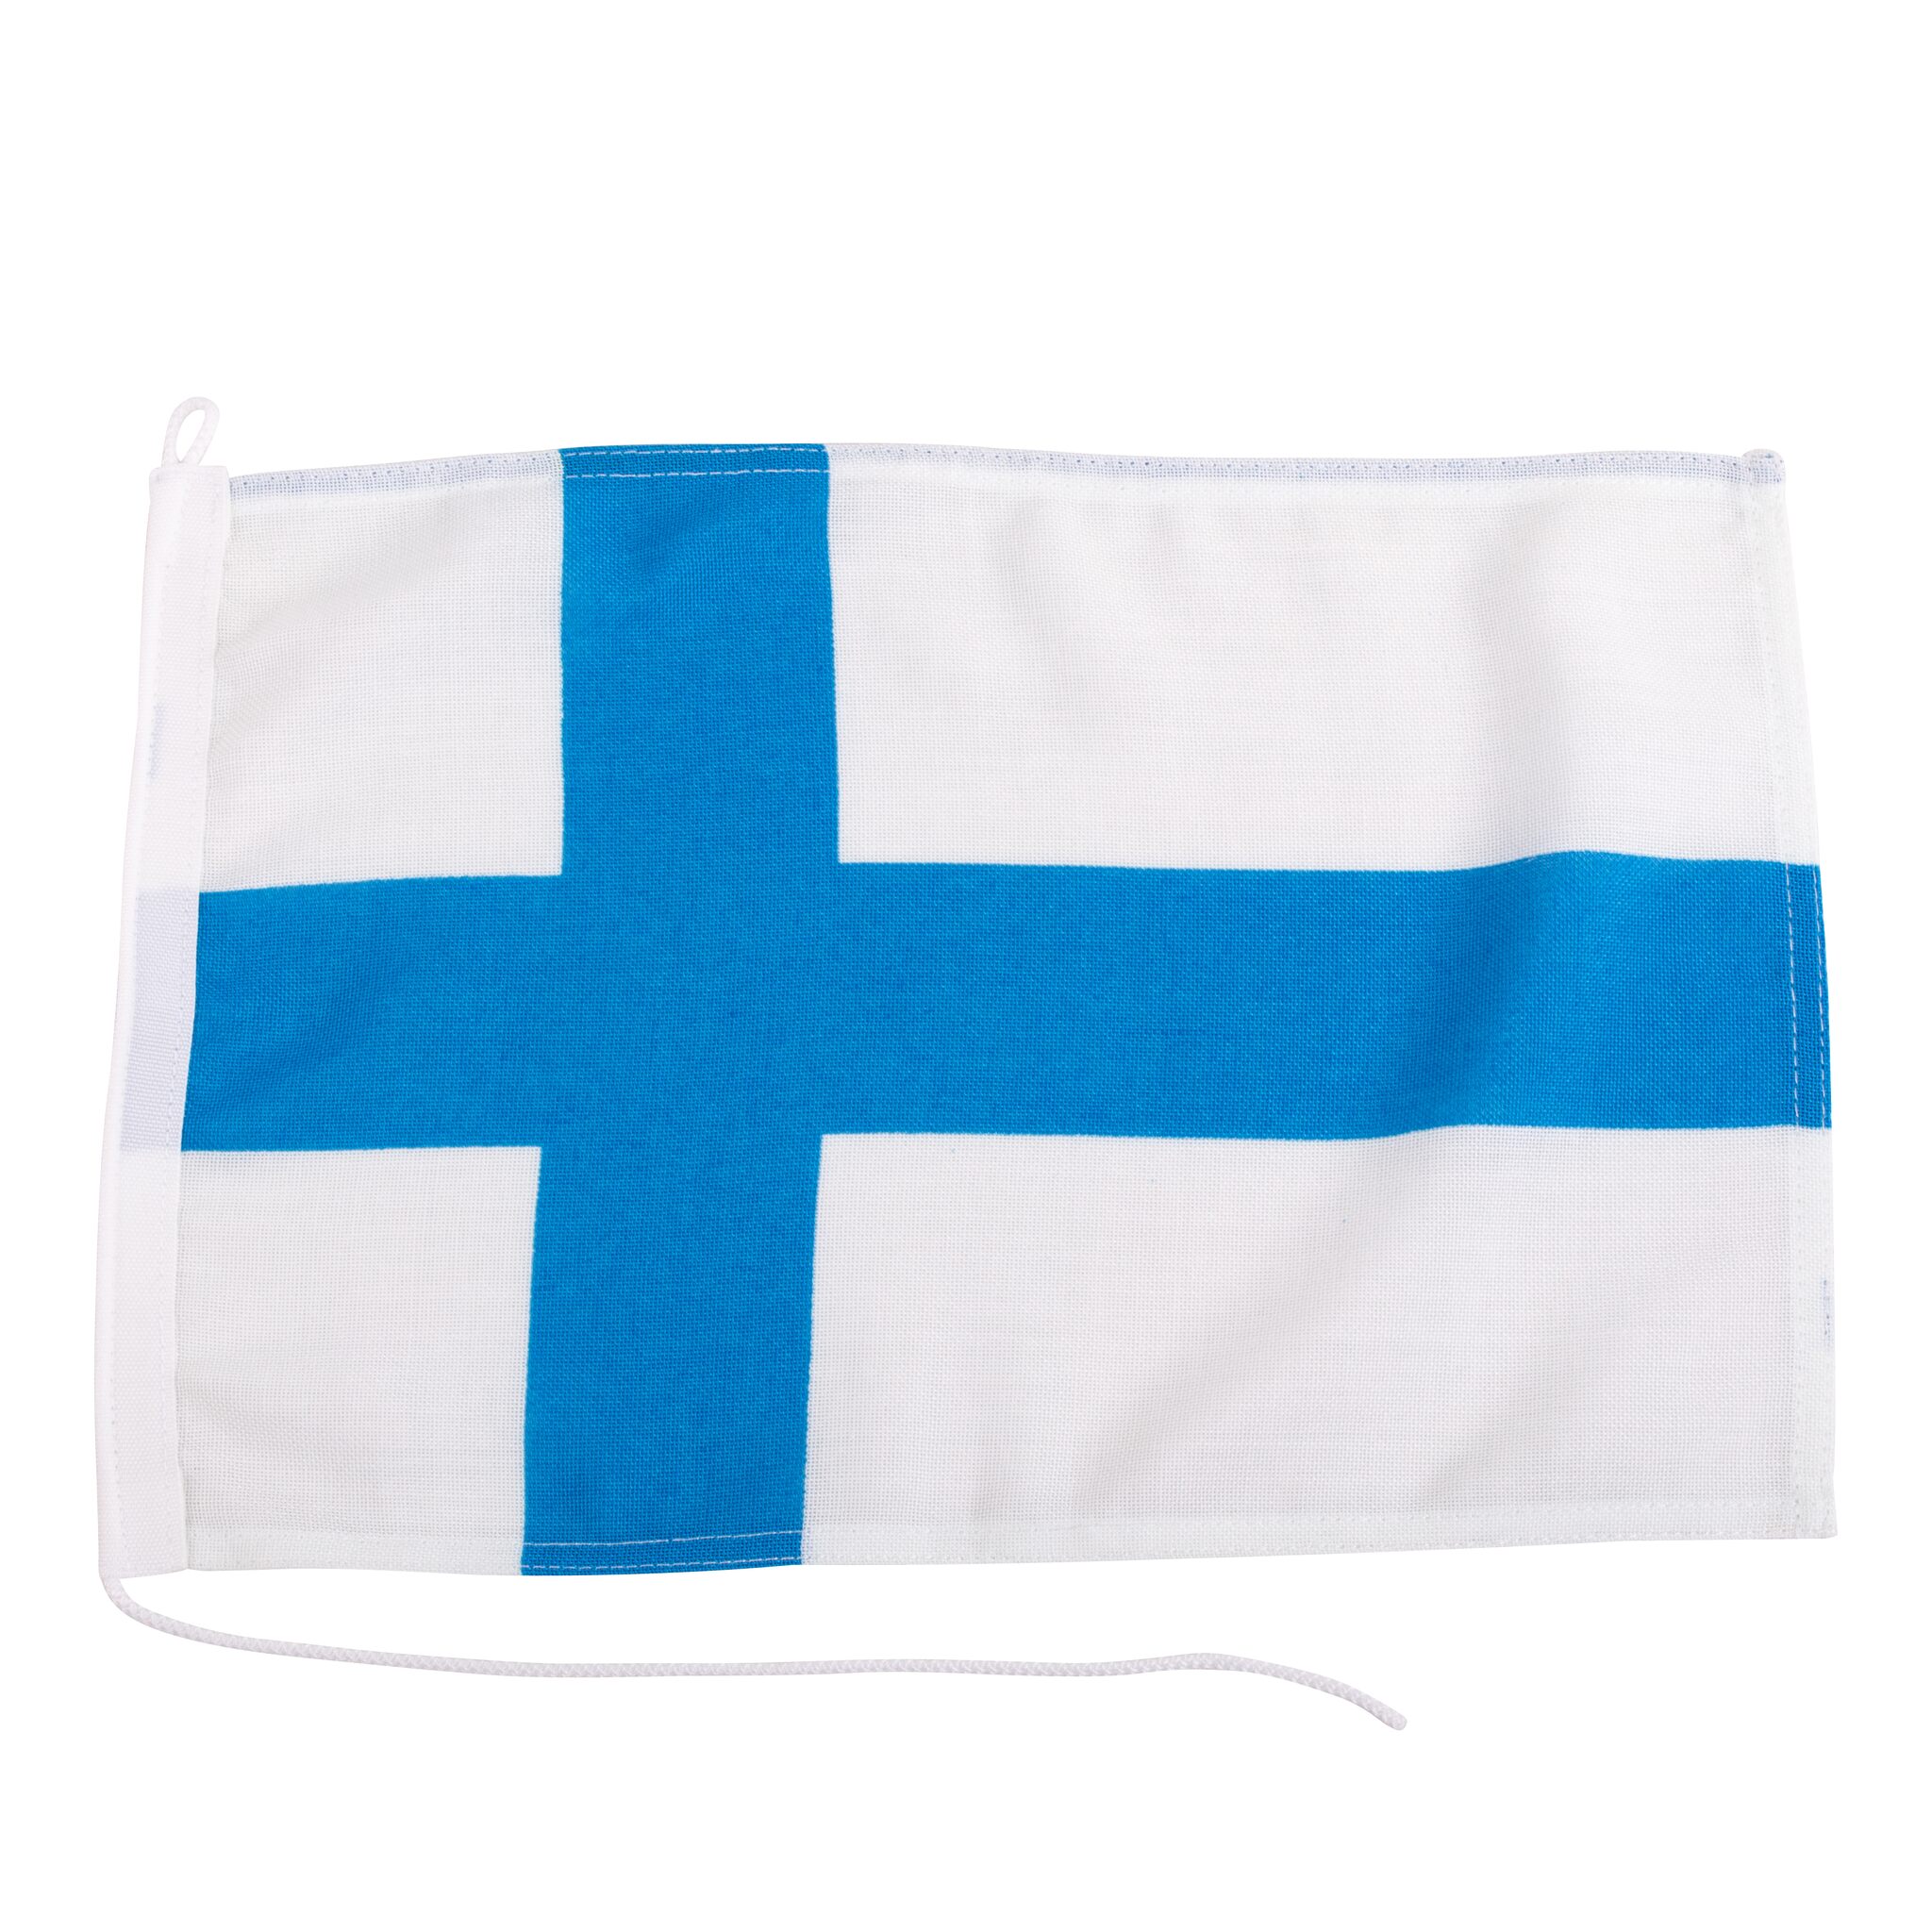 Guest country flag Finland